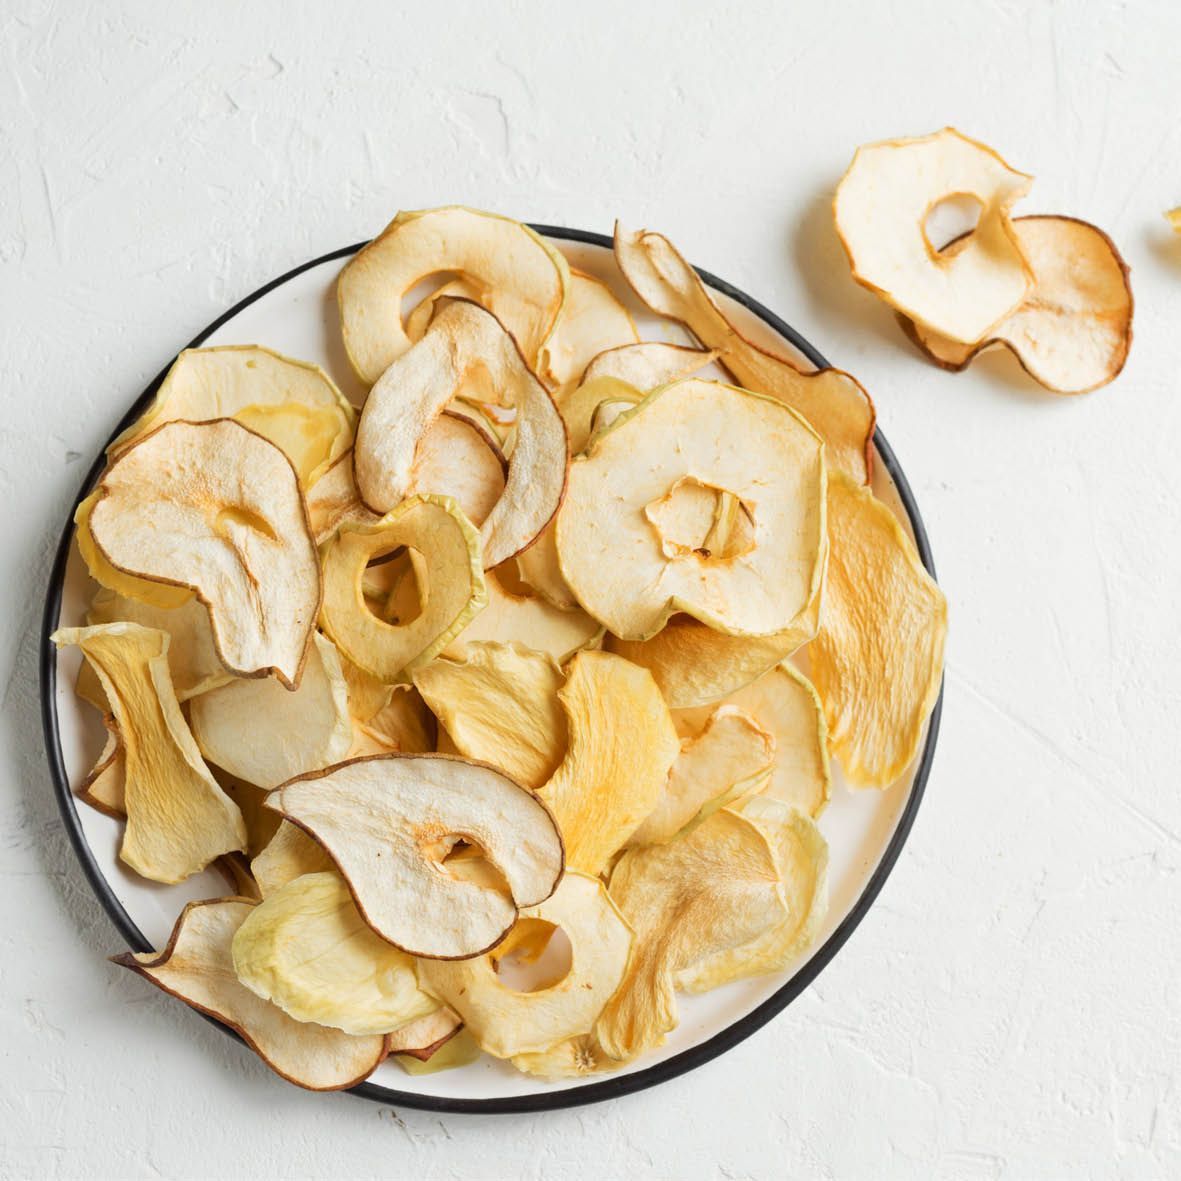 pear and apple chips.jpg